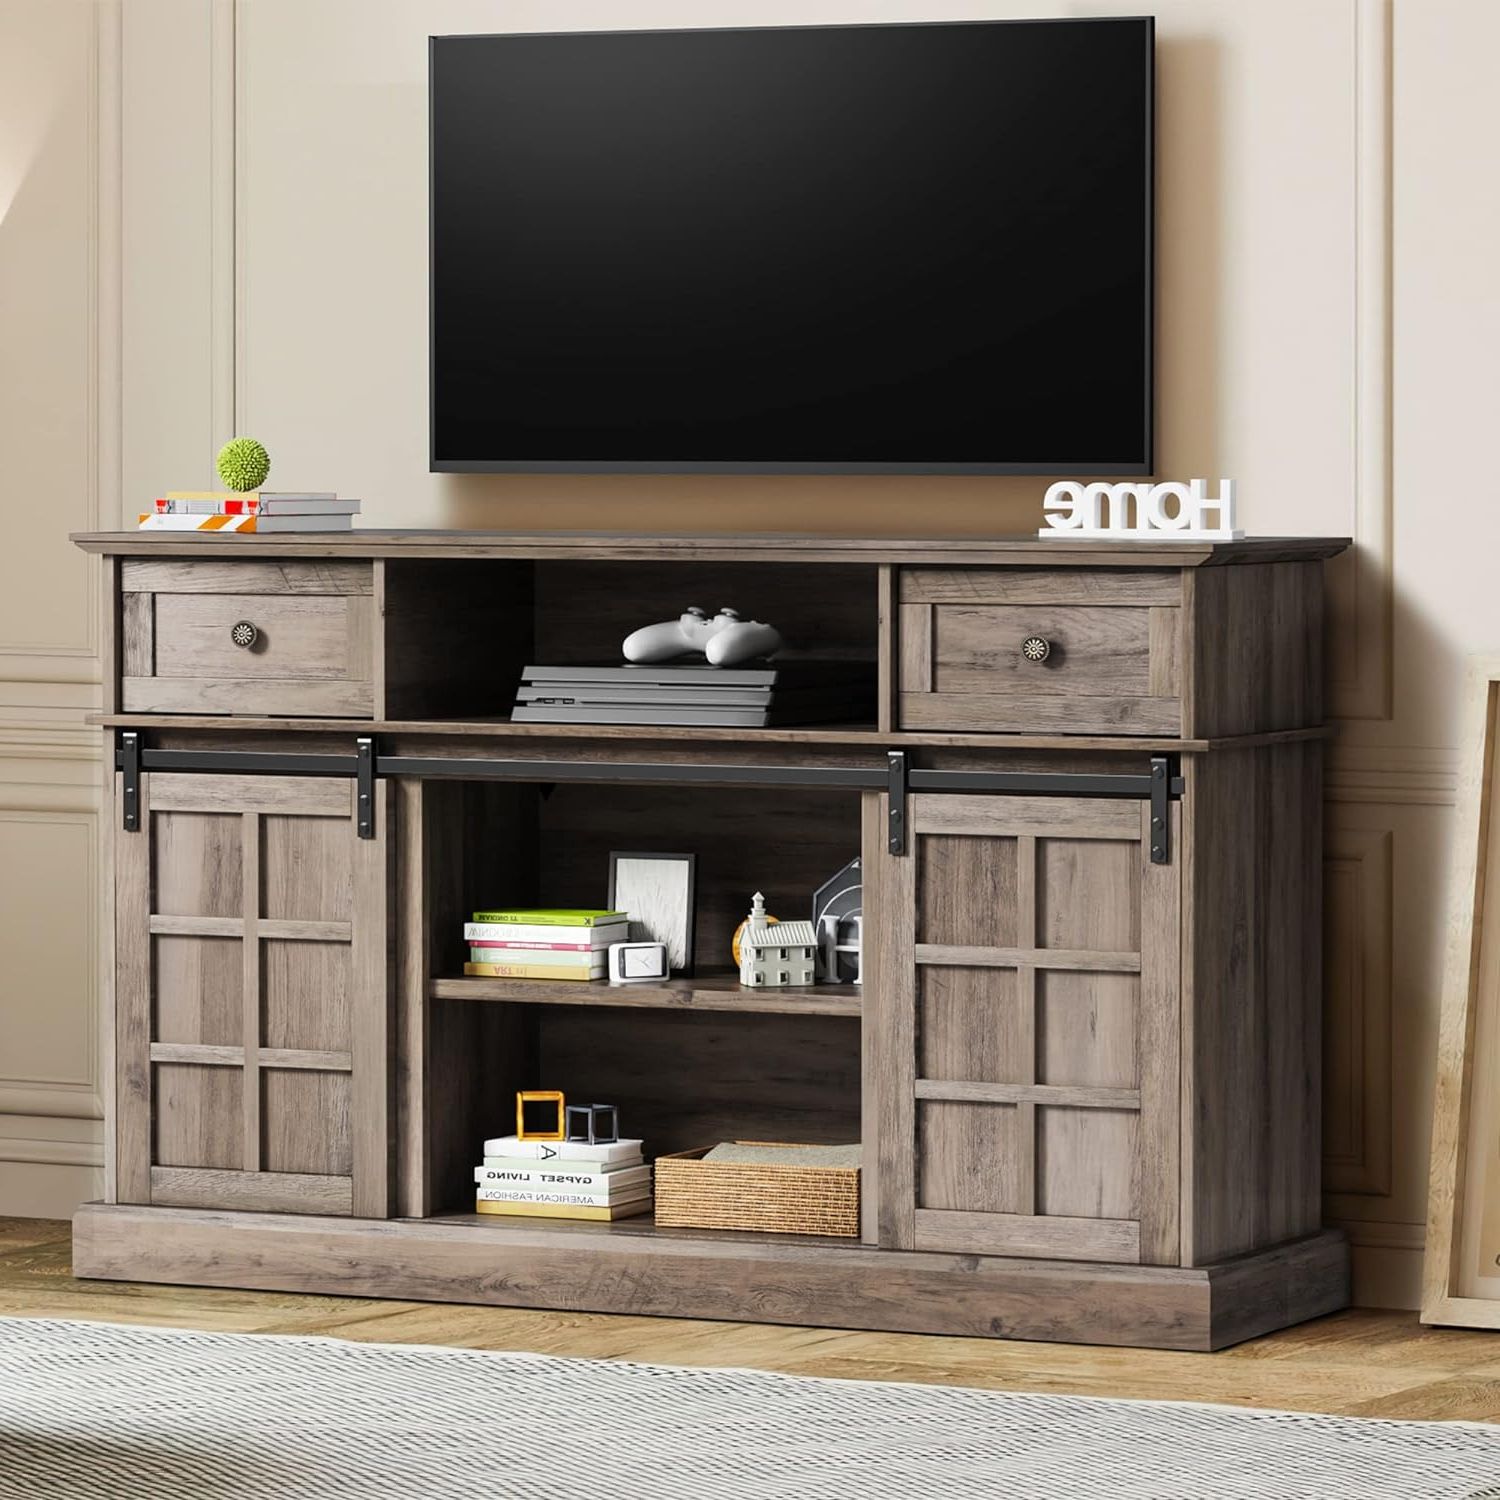 Lghm Entertainment Center, Farmhouse Tv Stand For 65 Nepal | Ubuy Intended For Farmhouse Media Entertainment Centers (Gallery 14 of 20)